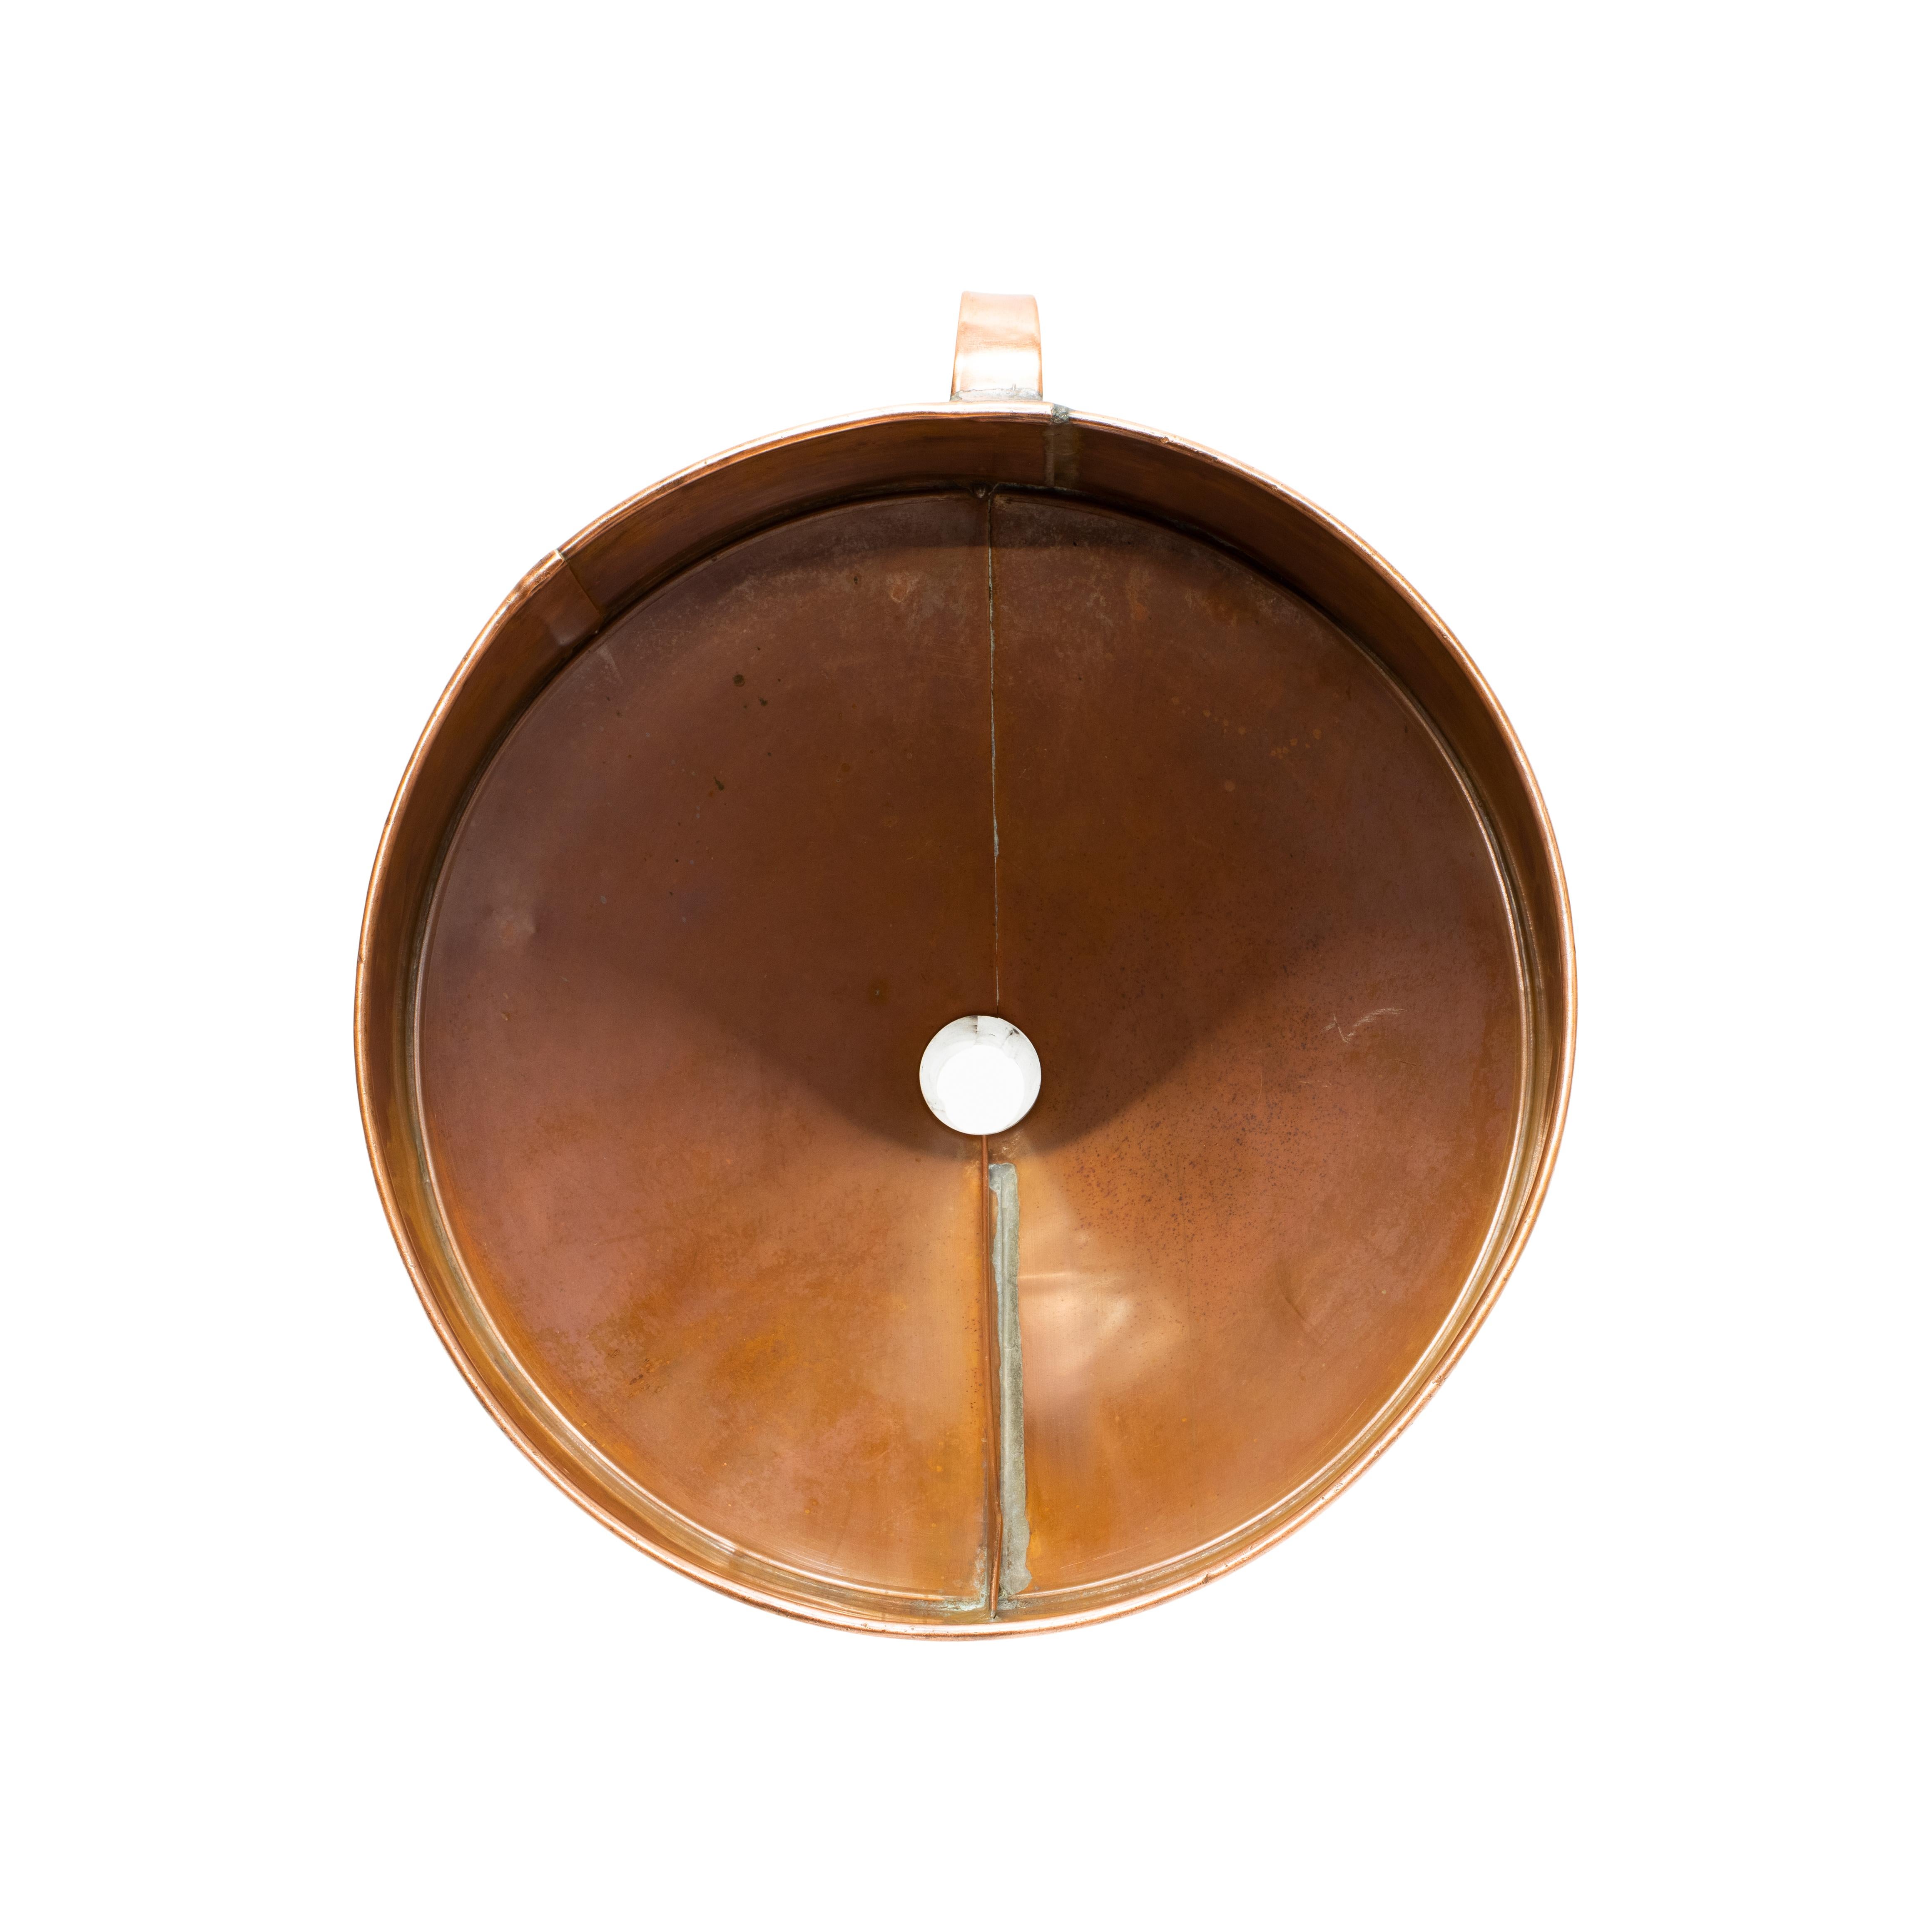 Vintage French large copper wine barrel funnel. The funnel is in beautiful condition with great patina showing it's age. The funnel was used in the wine making process, specifically for pouring the wine into wooden barrels in French vineyards in the